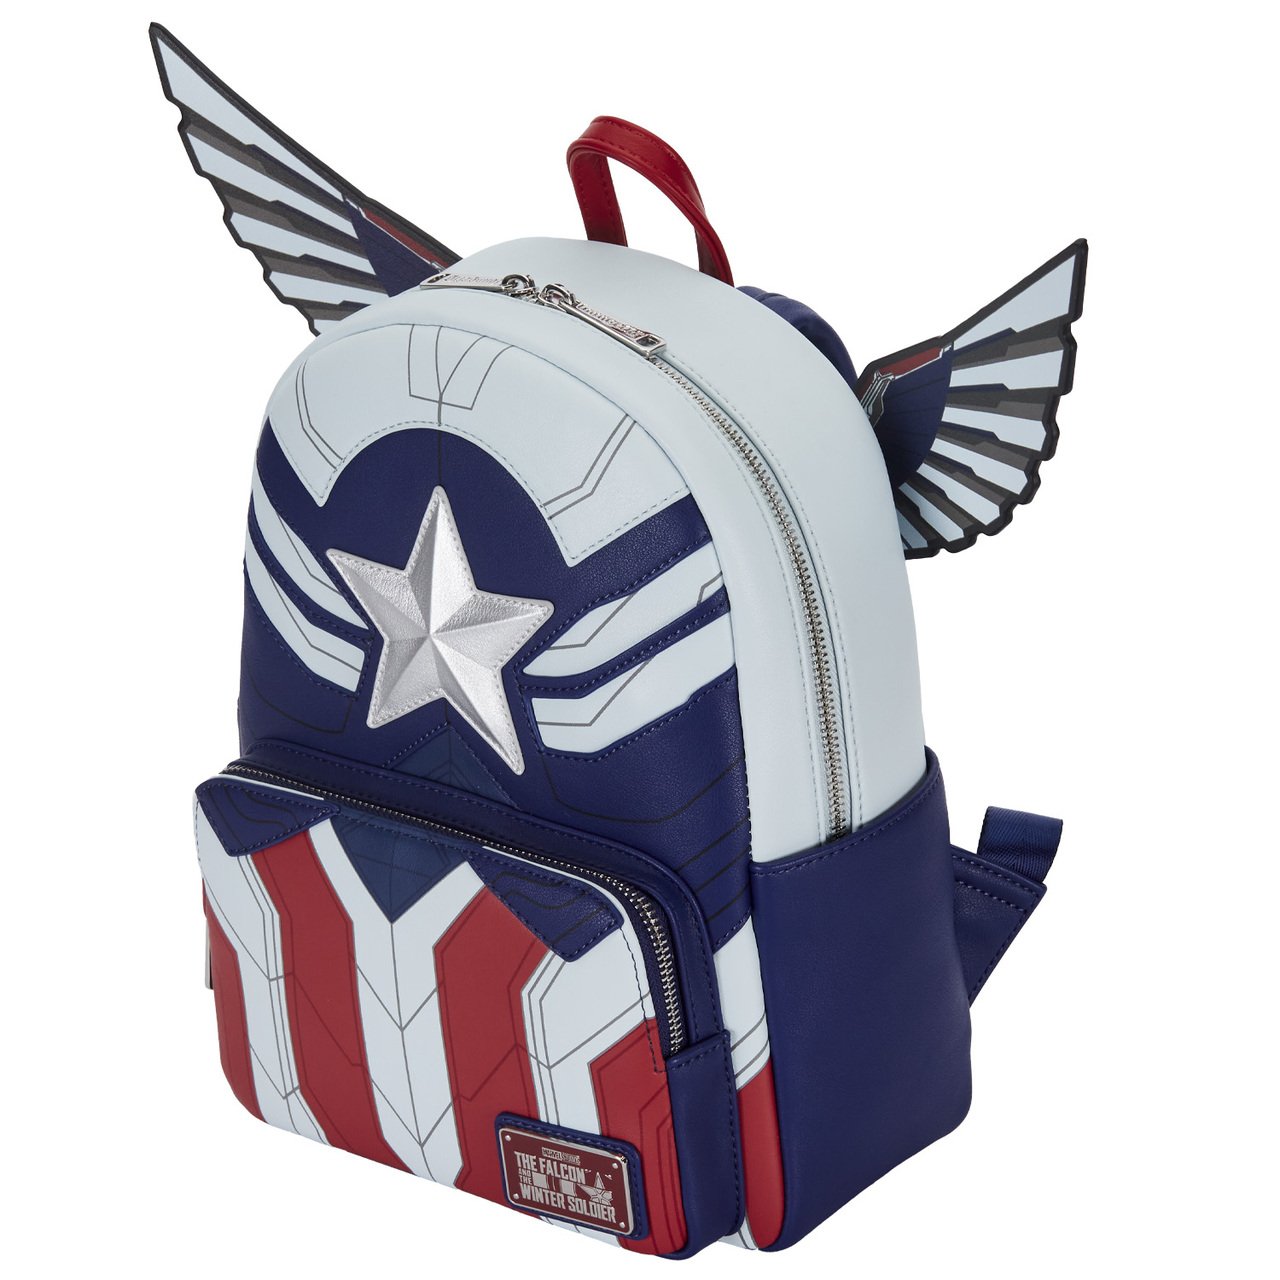 Loungefly x Marvel The Falcon and the Winter Solider Captain Falcon Mini Backpack - GeekCore